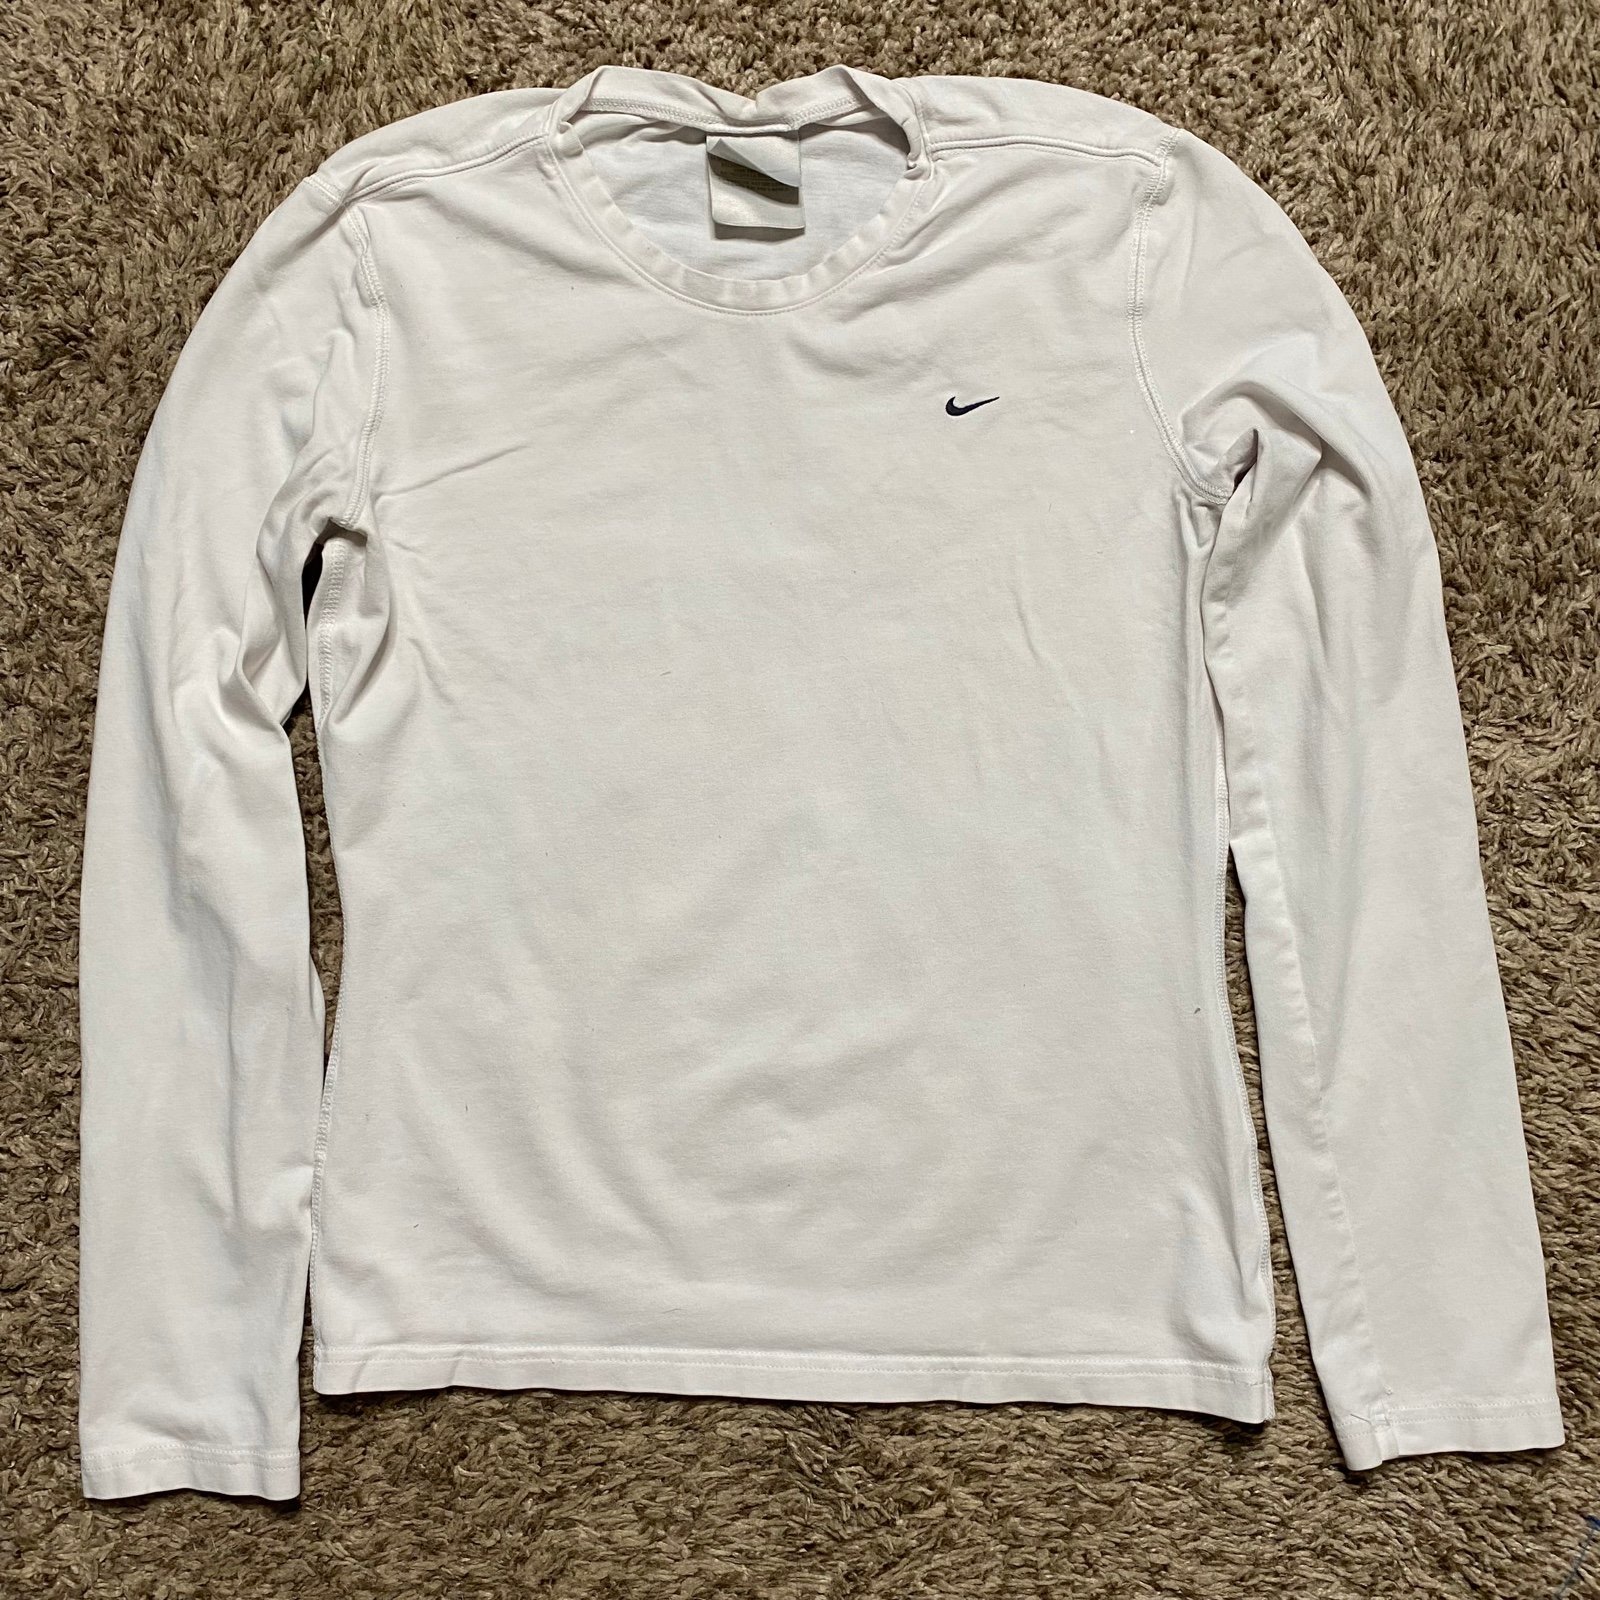 save up to 70% Vintage nike long sleeve lA1eubBhR Cool